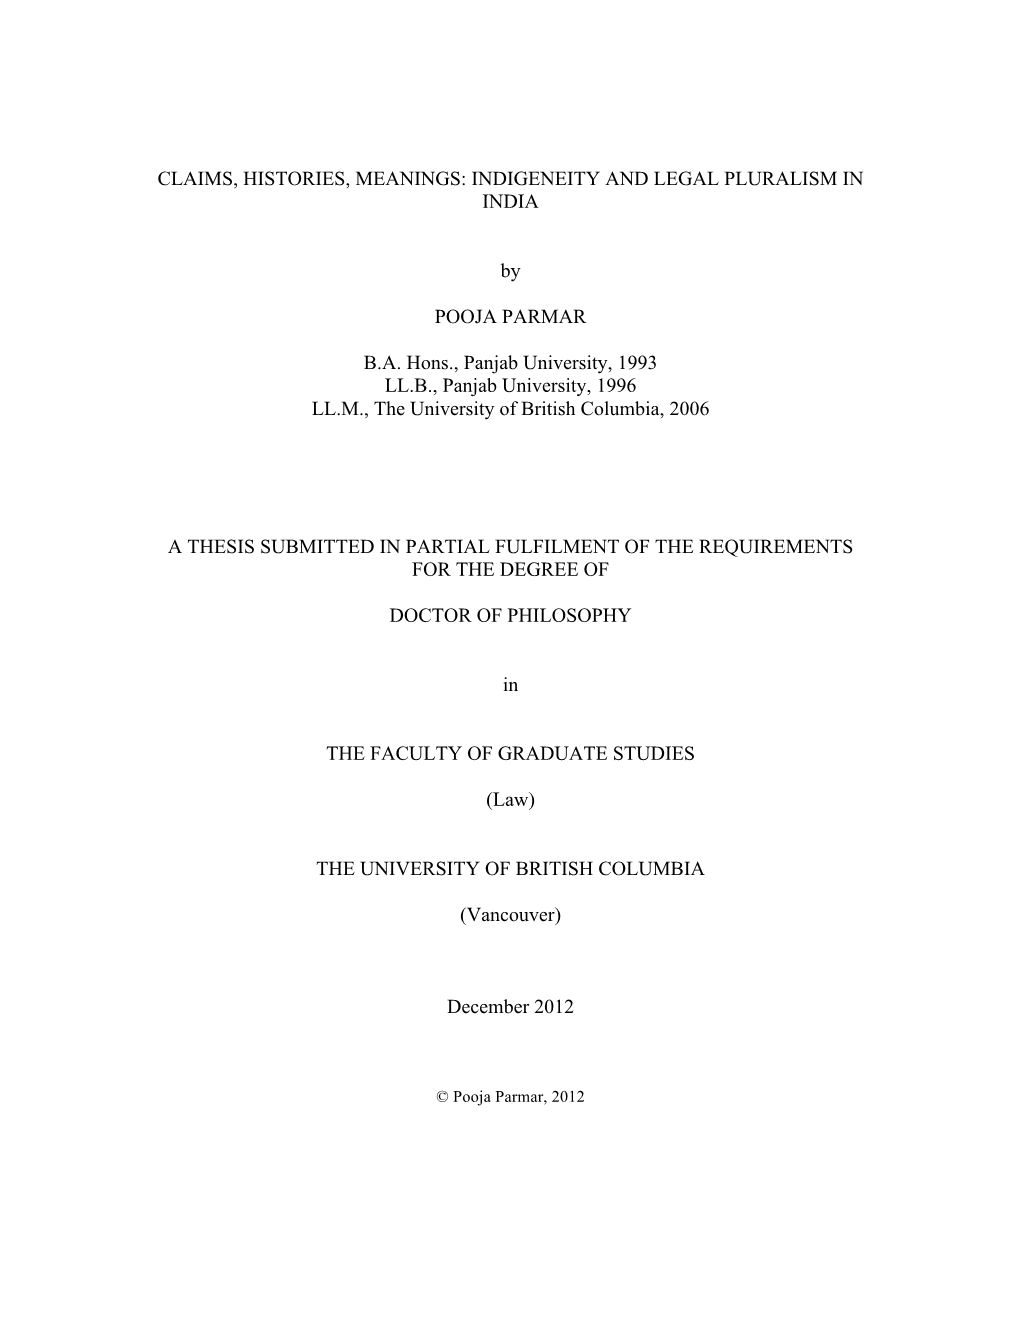 Claims, Histories, Meanings: Indigeneity and Legal Pluralism in India